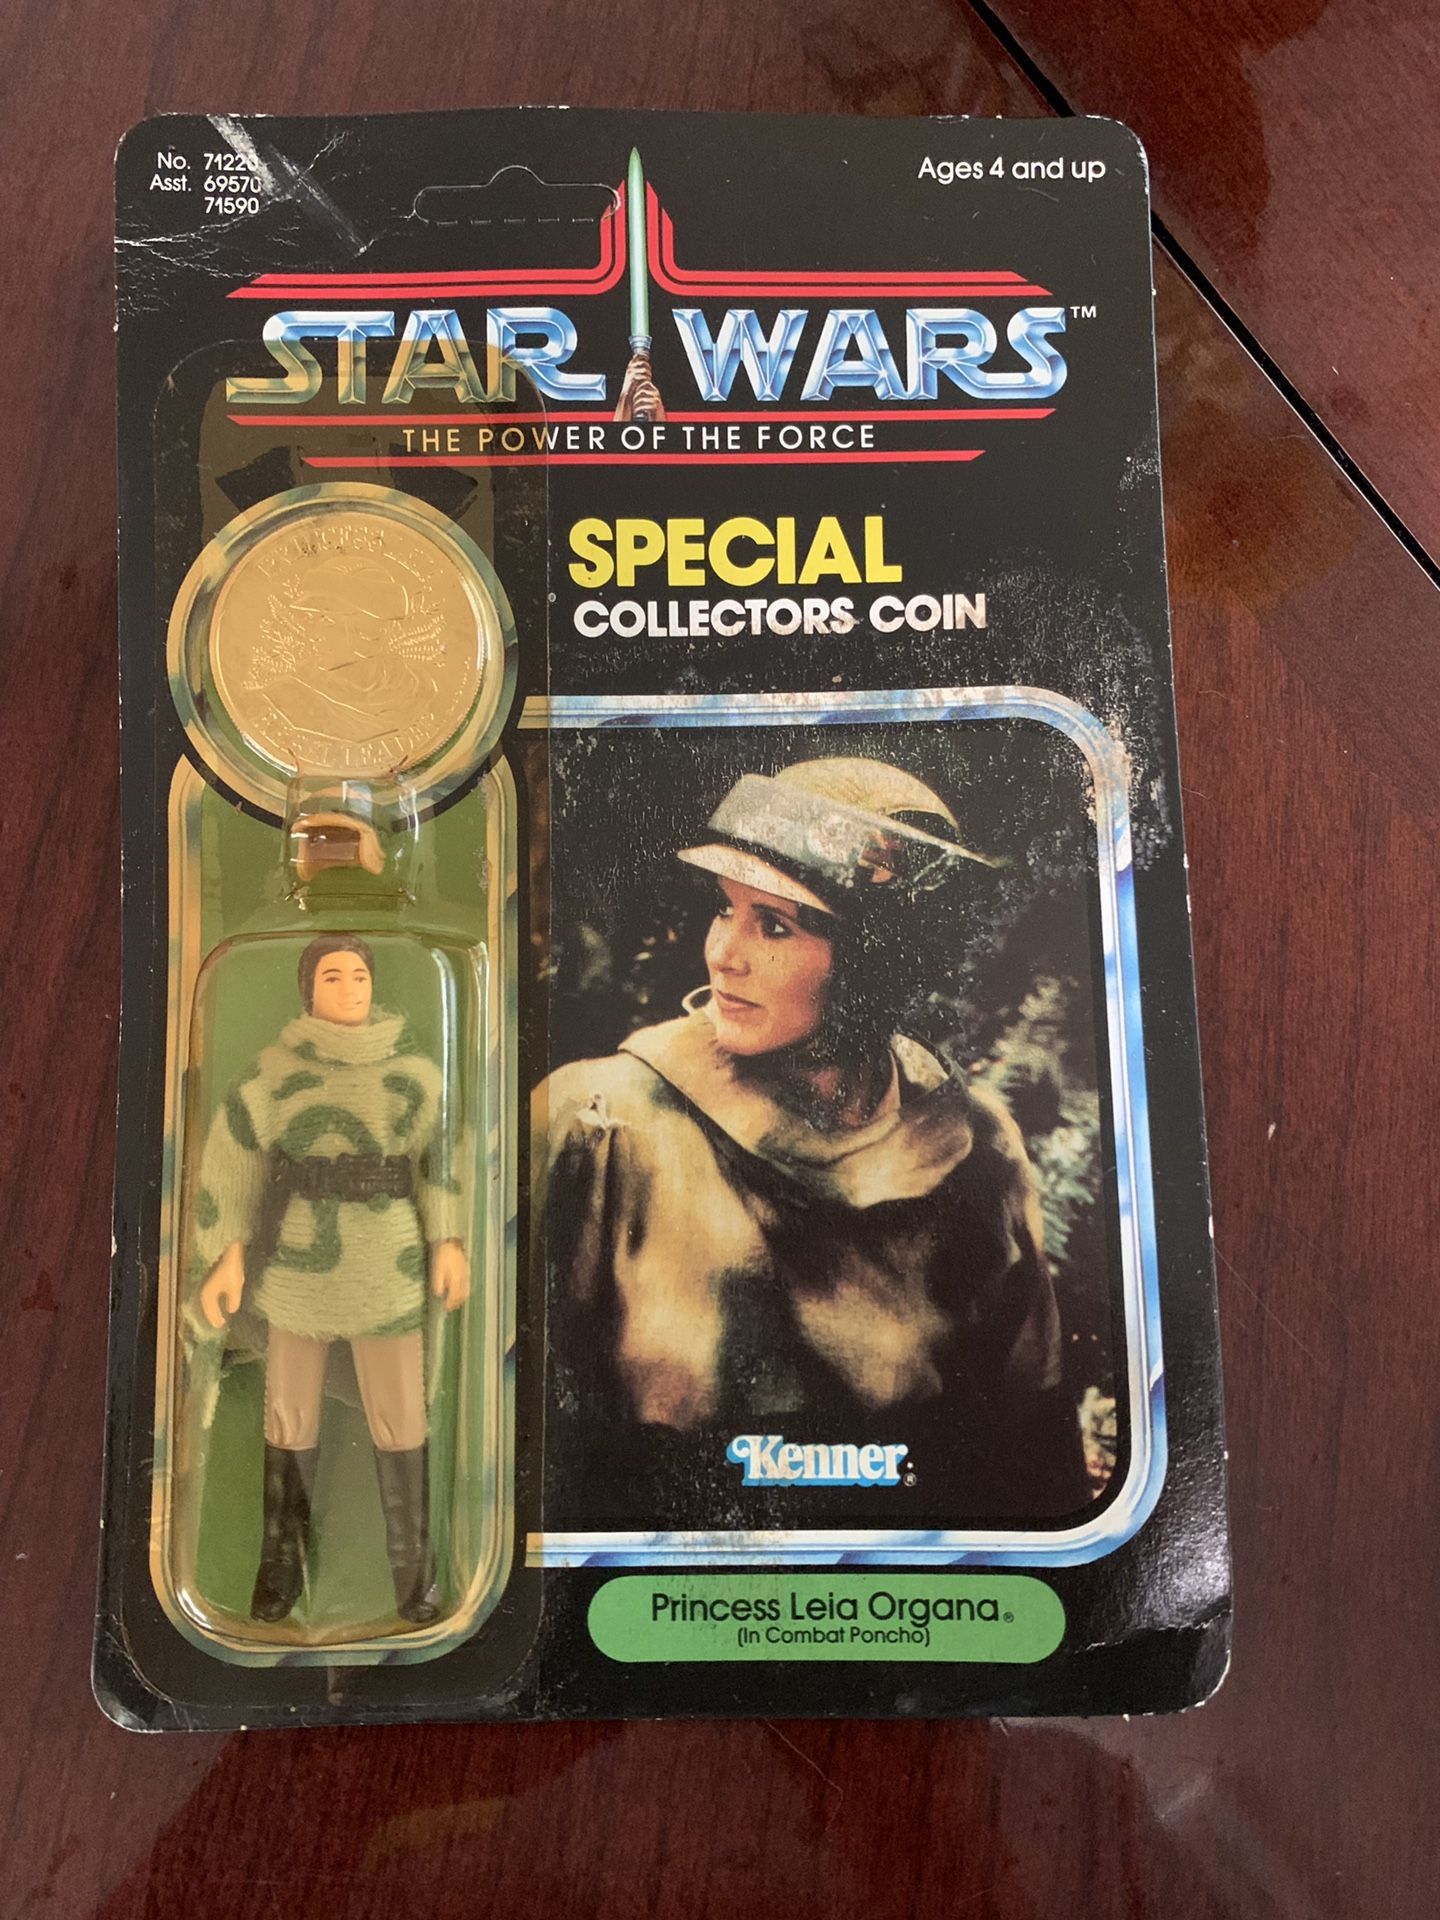 1984 coin collectible Star Wars